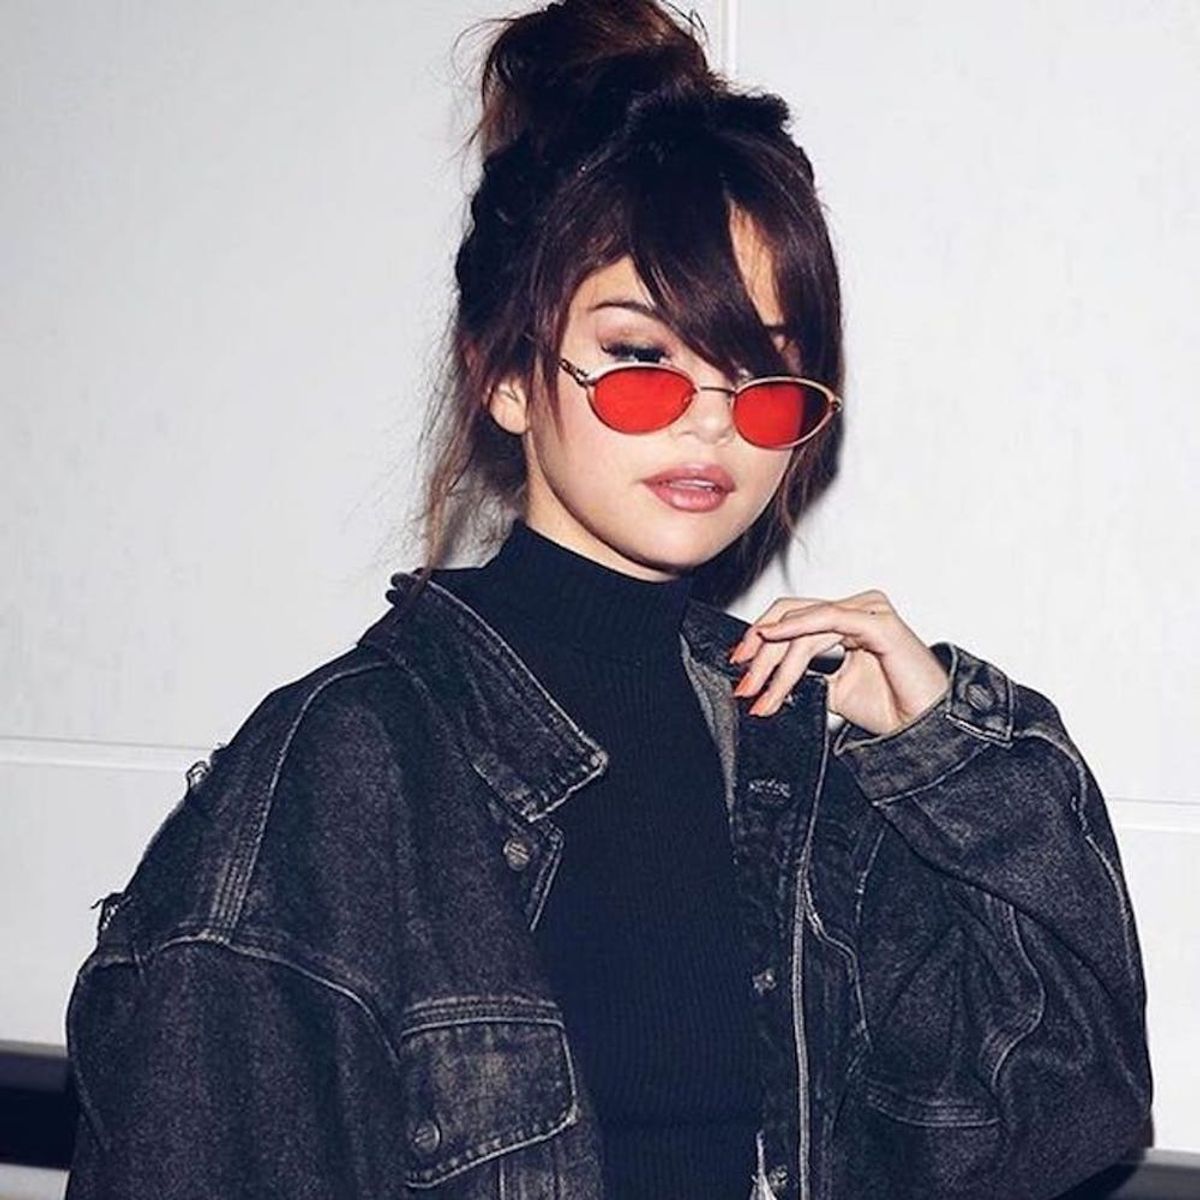 7 Celebs With Small Sunglasses Prove the ’90s Will Never Die